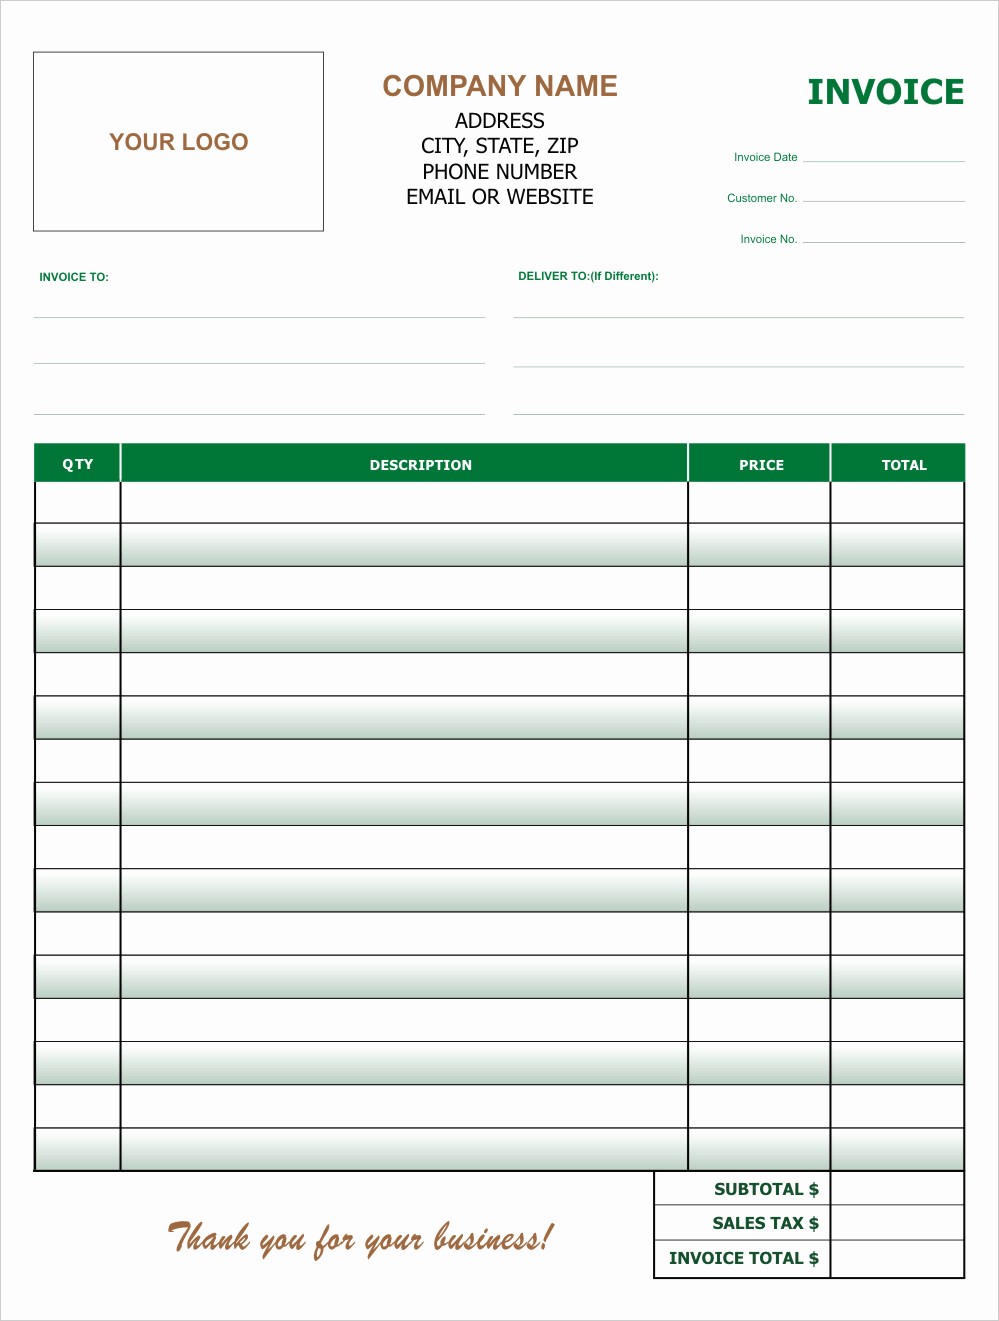 Copy Of An Invoice Template Unique Carbon Copy Service Invoice Template to Personalize with 5